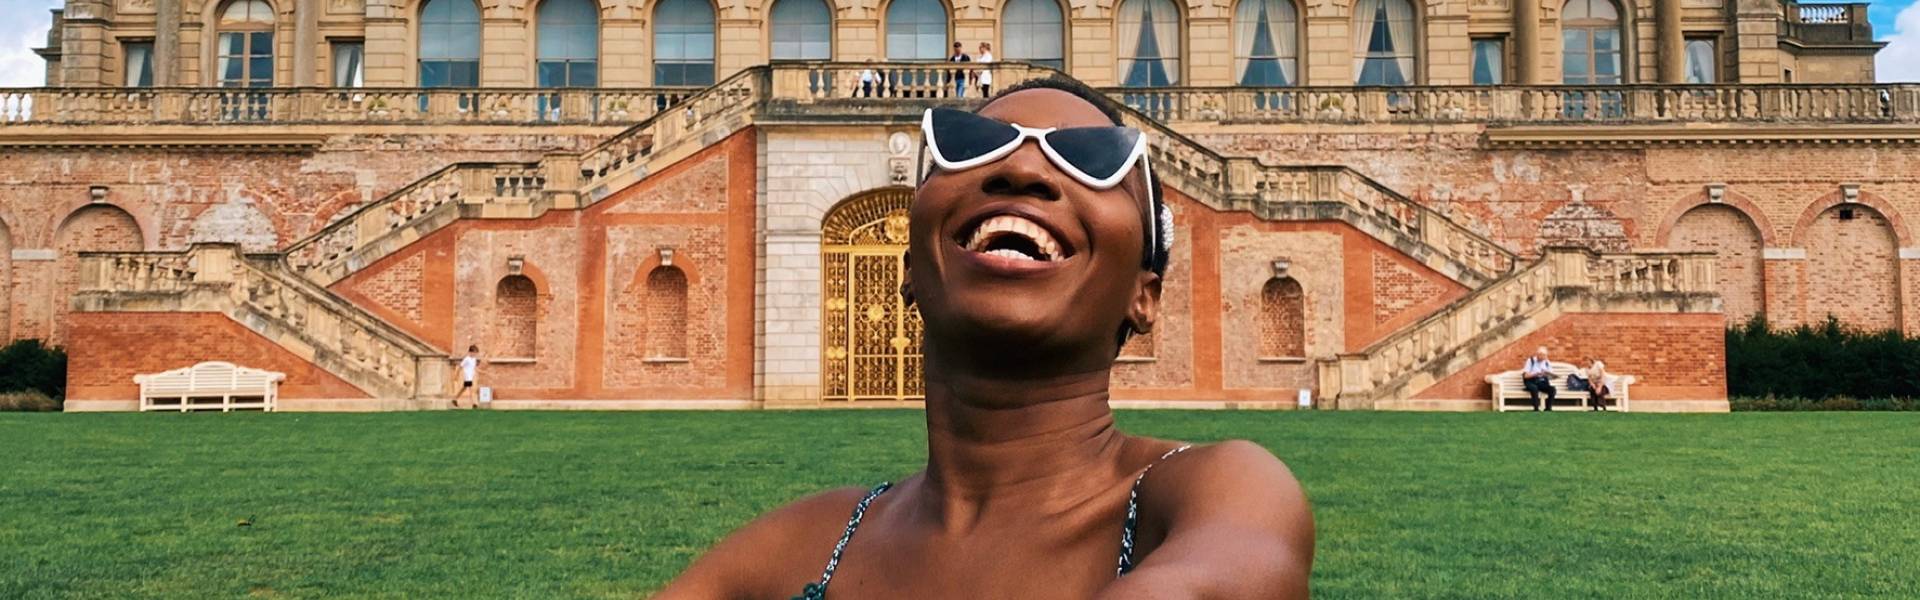 Smiling woman, wearing sunglasses and sundress, outside Cliveden House - a large stately home.